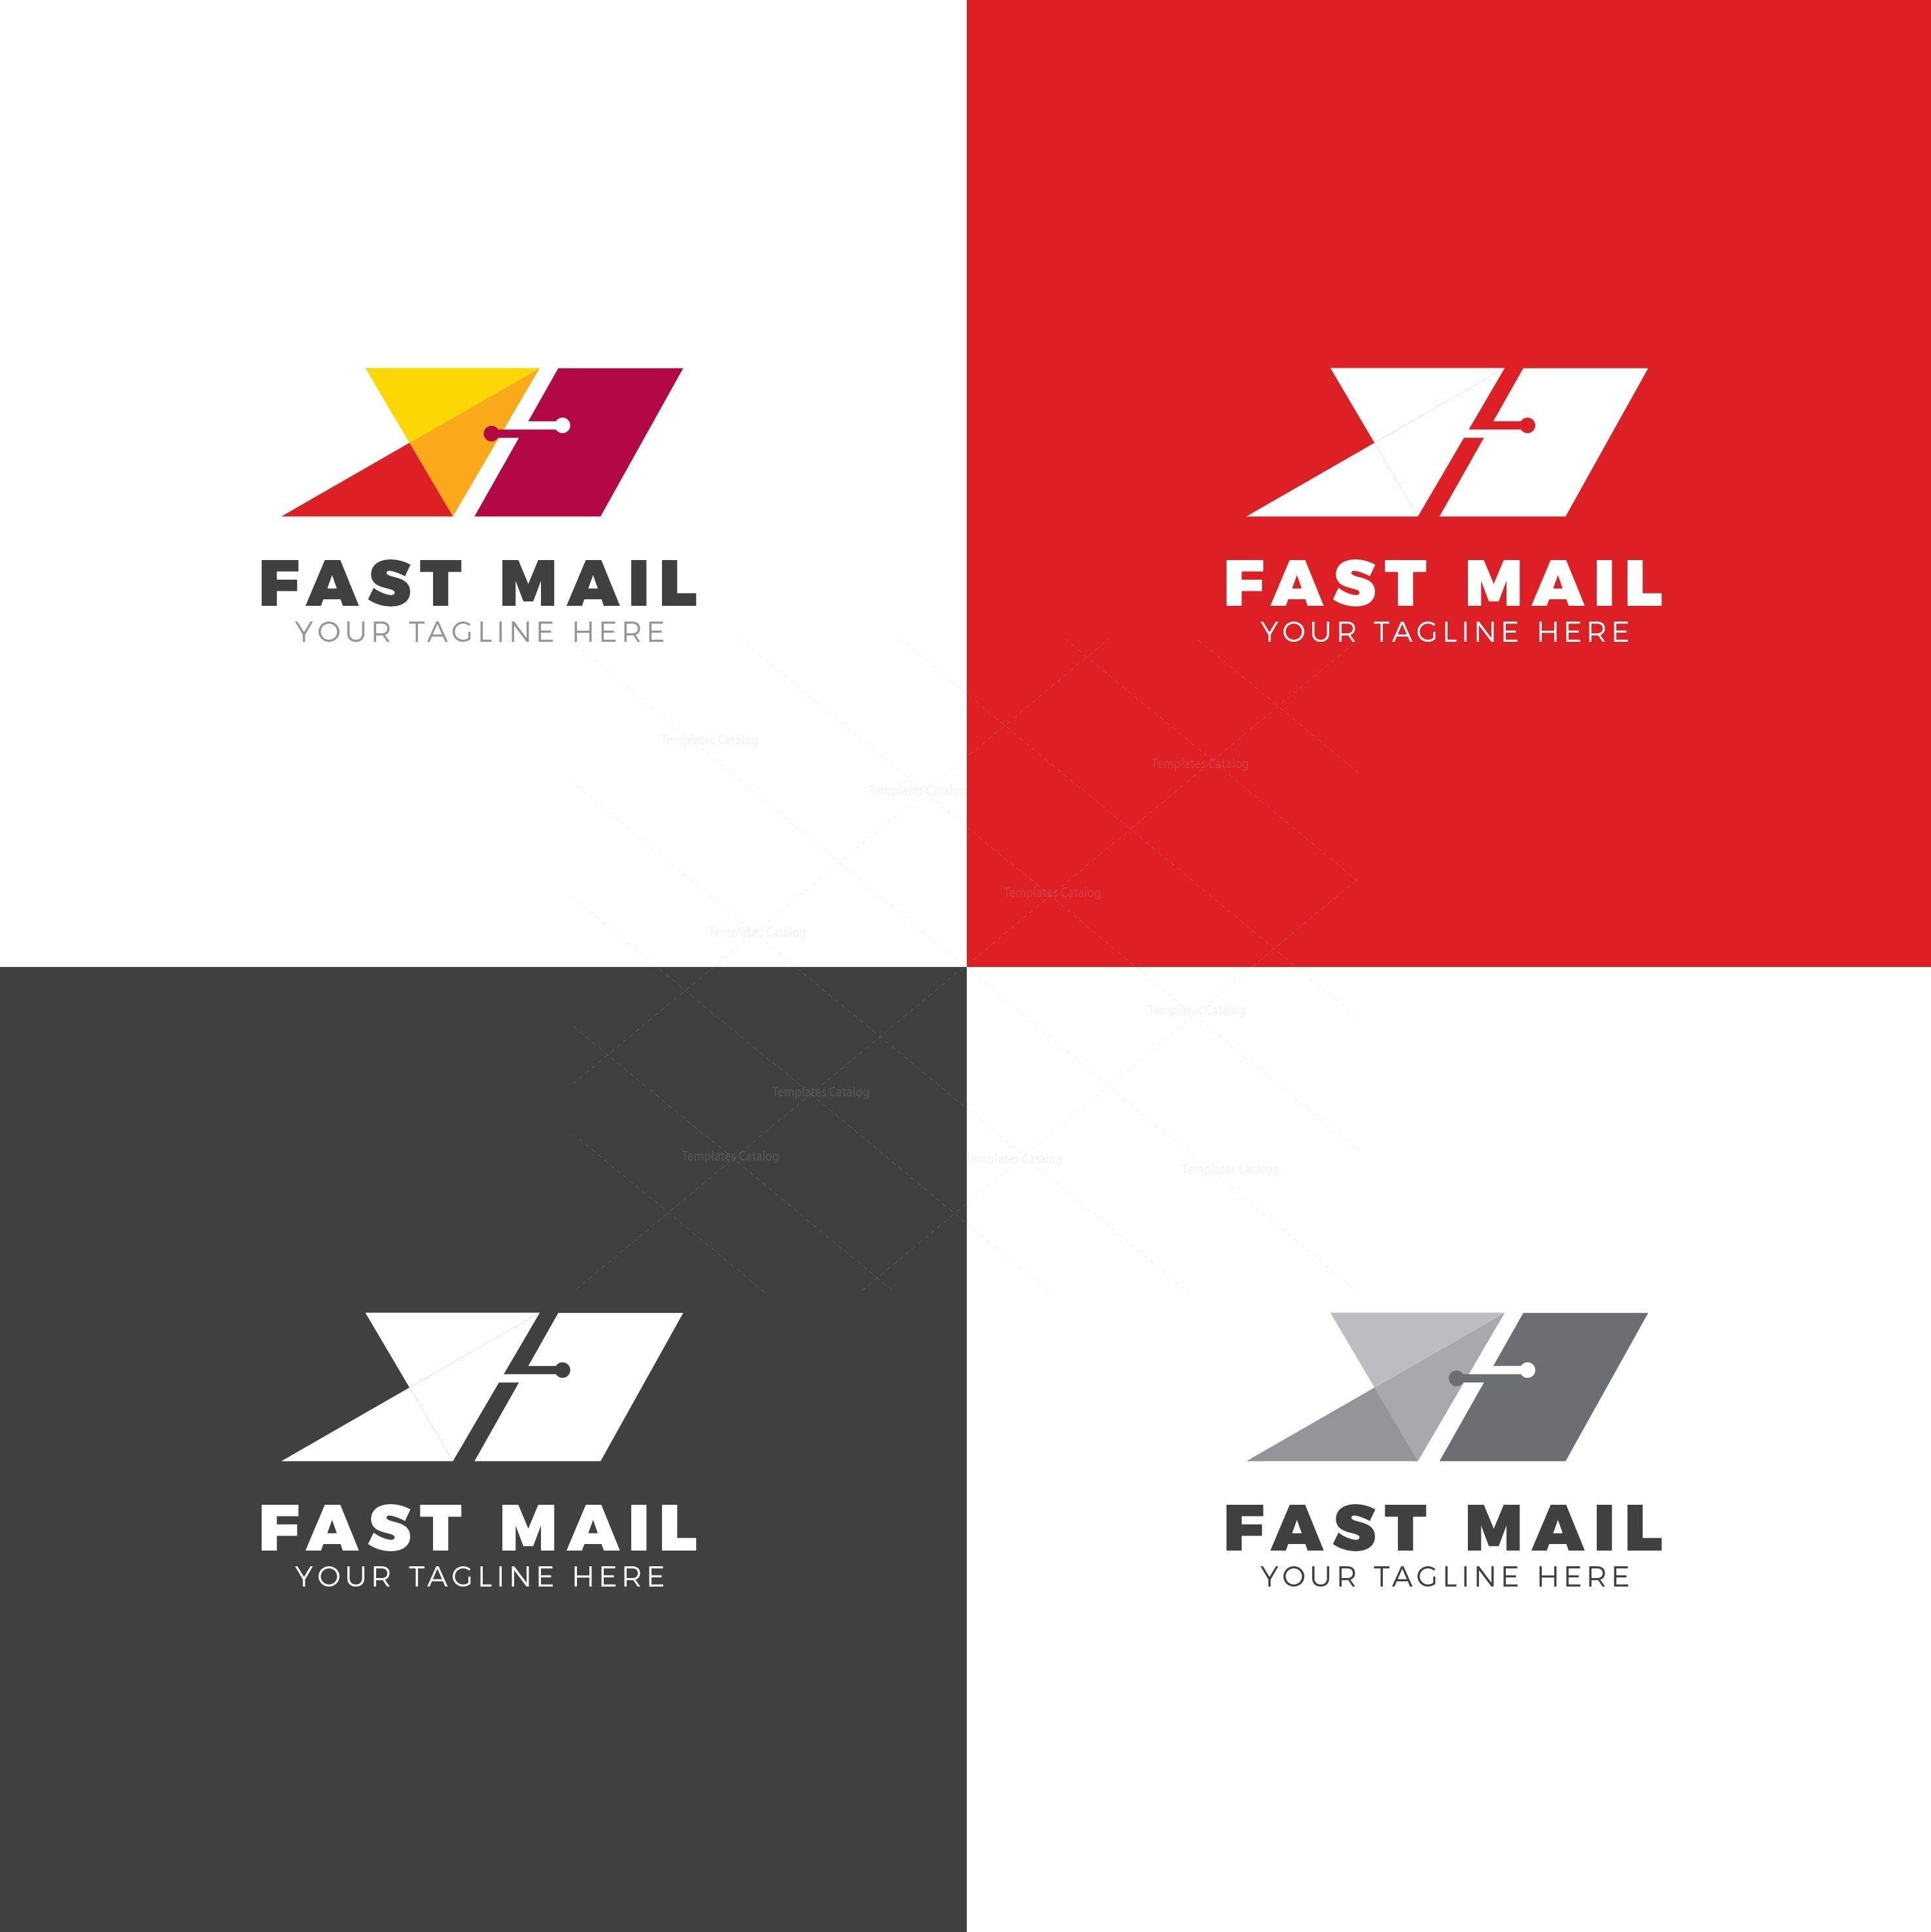 Fastmail Logo - Fast Mail Creative Logo Design Template 001742